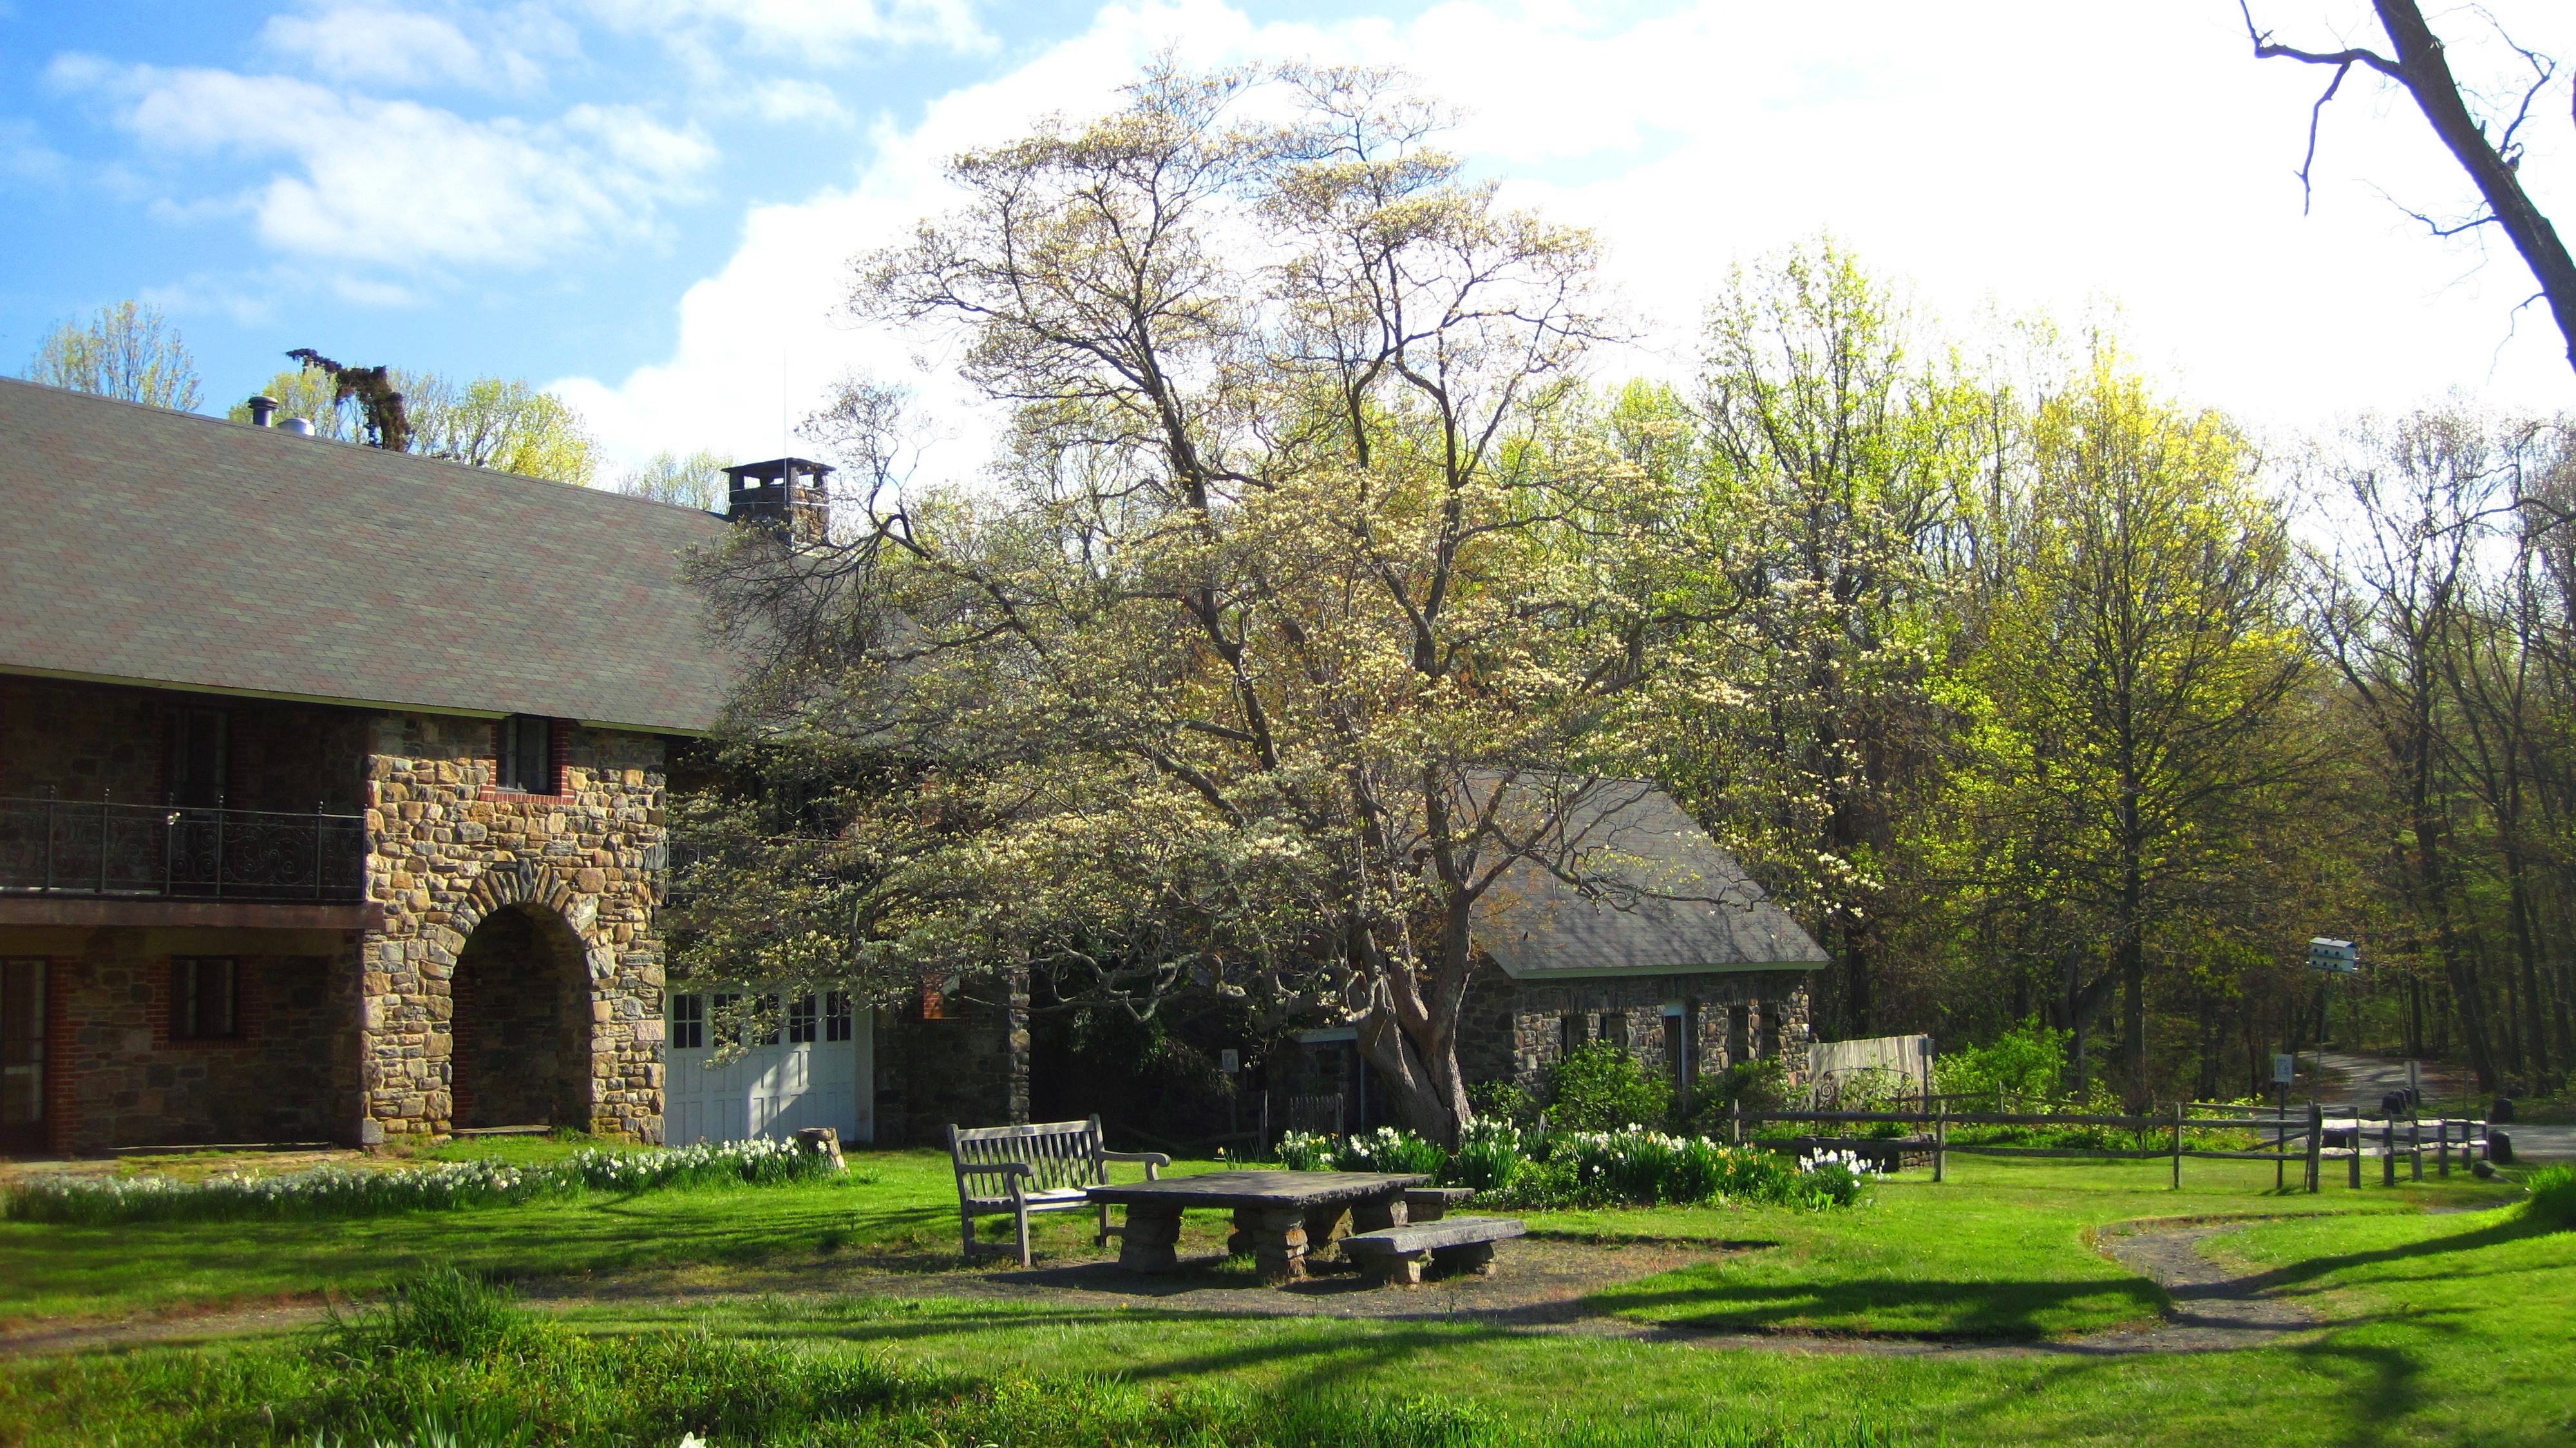 The refuge headquarters building at the Salt Meadow Unit, also know as the Lape-Read House, surrounded by trees and grass showing off their vibrant spring colors.